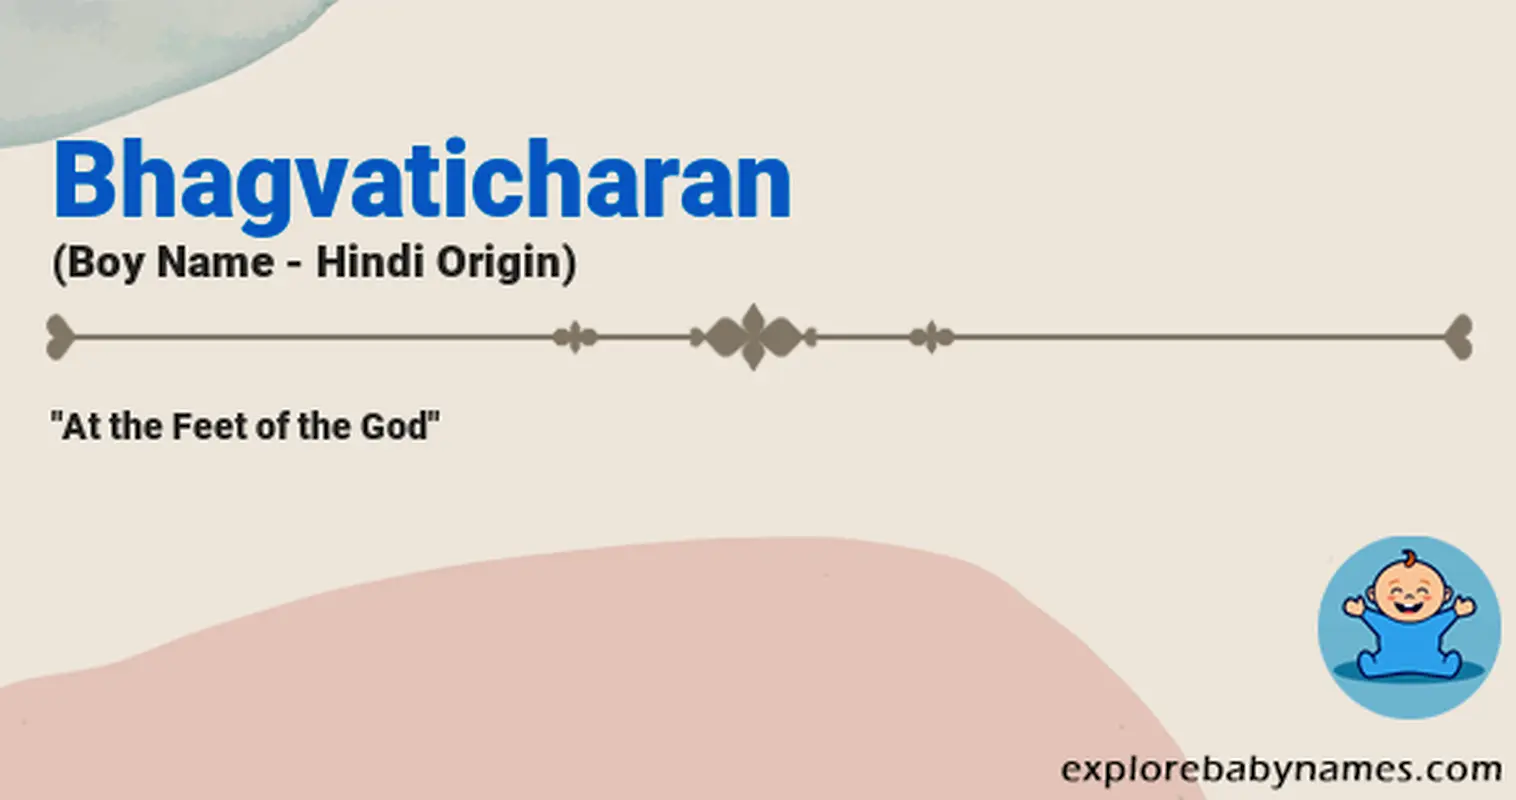 Meaning of Bhagvaticharan